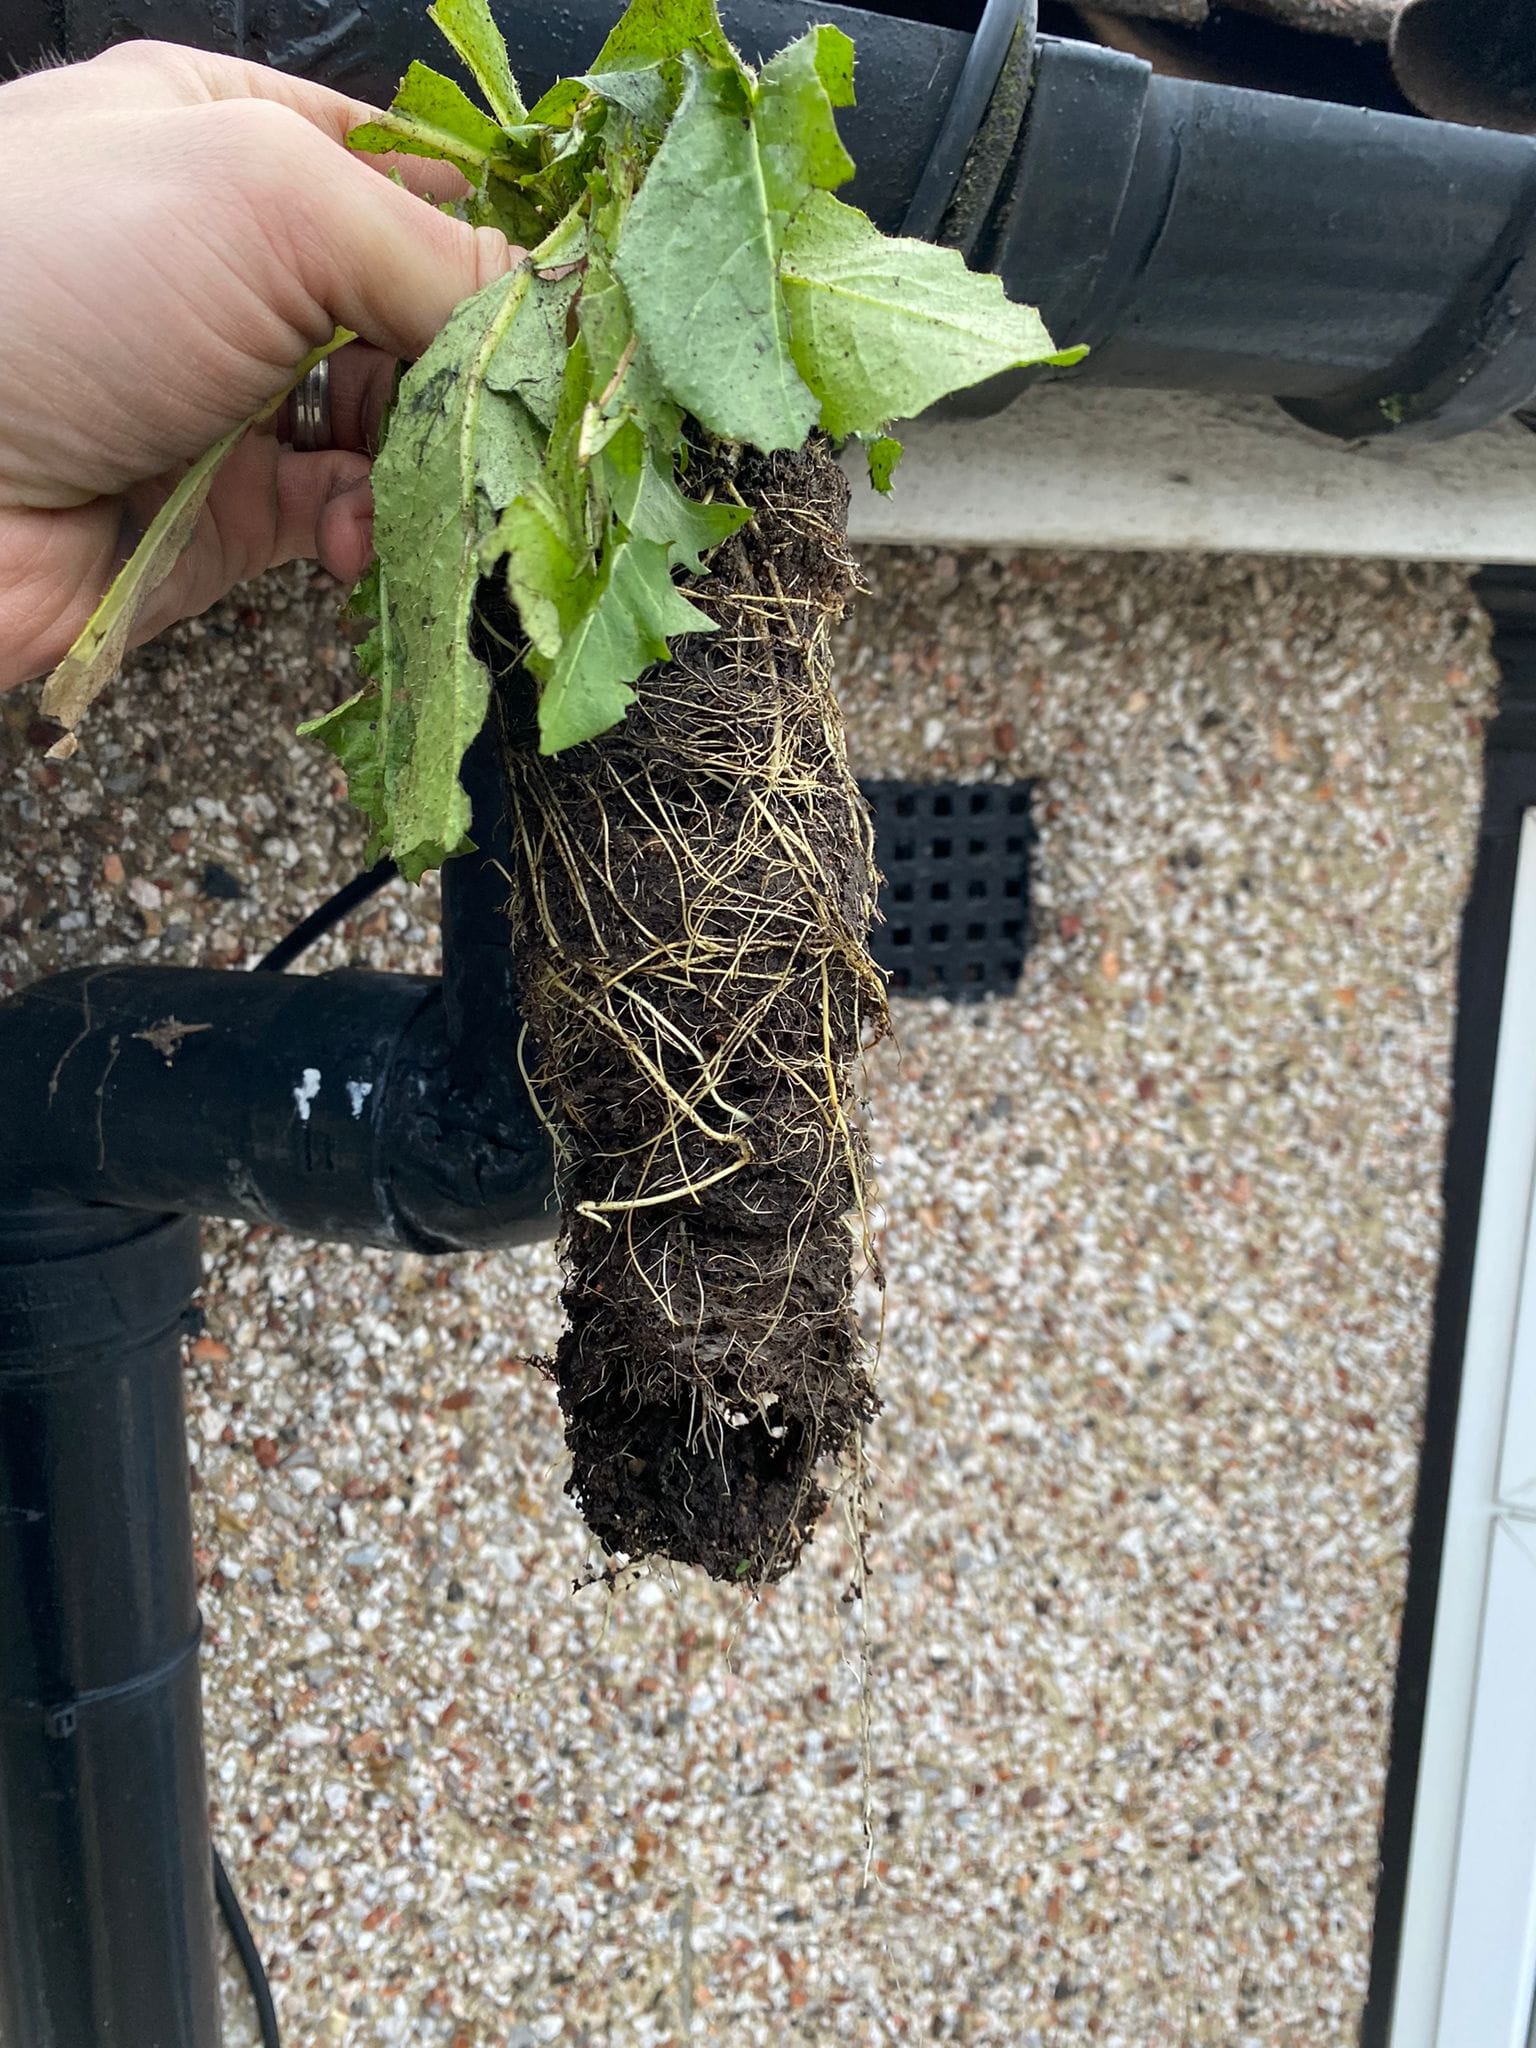 Plant pulled out of house gutter pipes by prestige bin cleaning in London